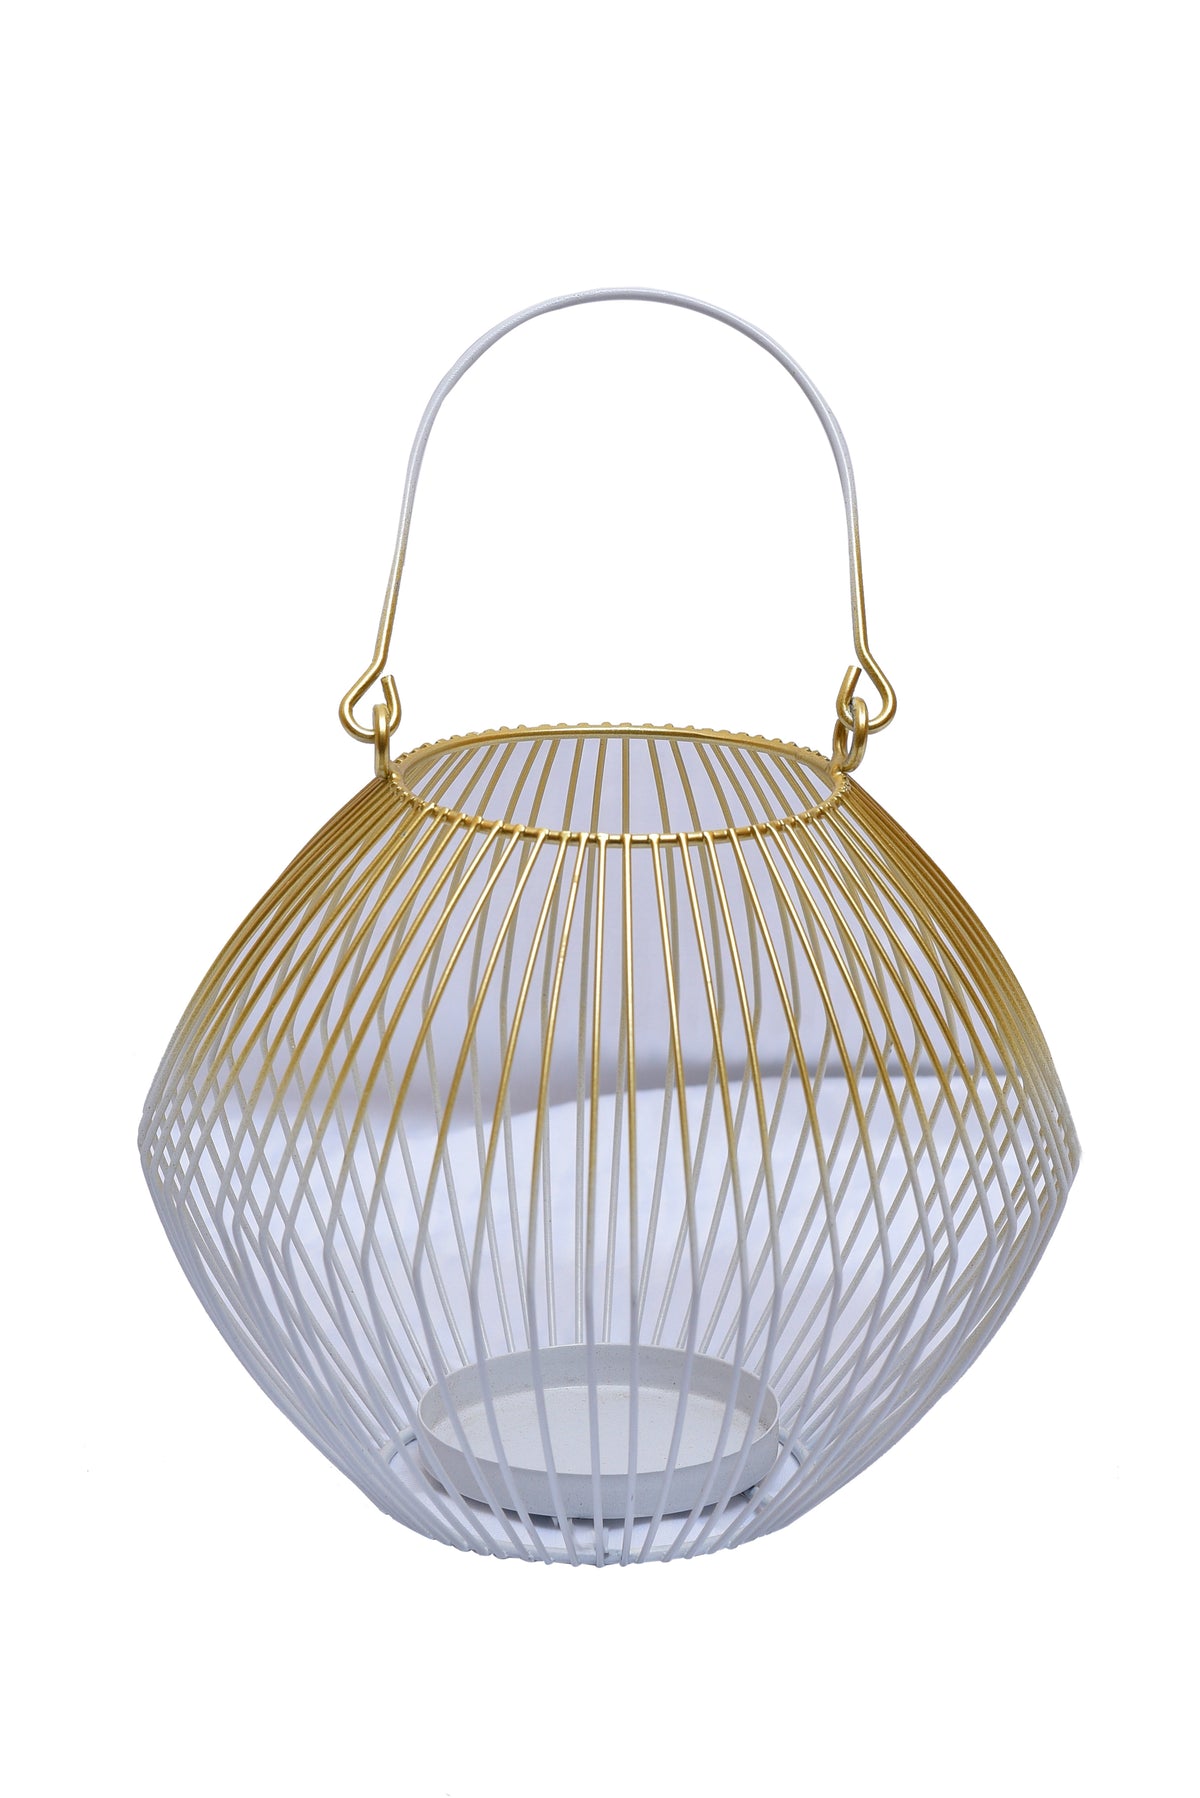 White and Gold Candle Holder Lantern